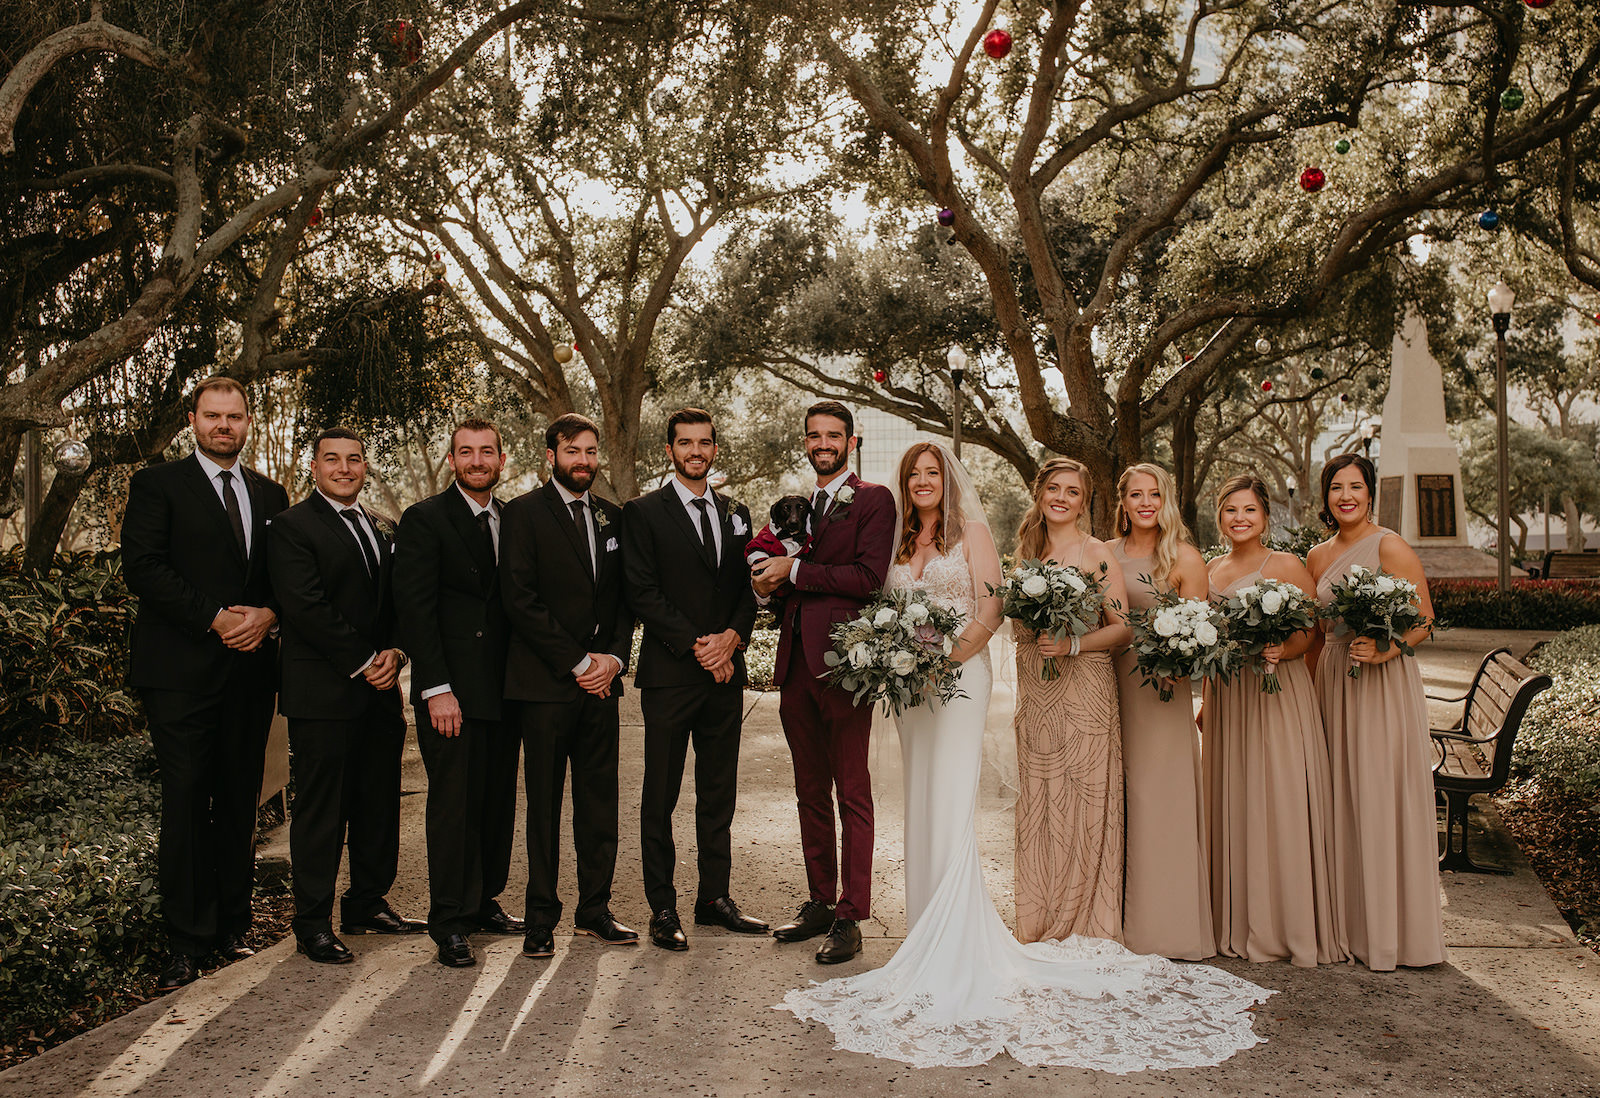 brown taupe bridesmaid dresses with groomsmen